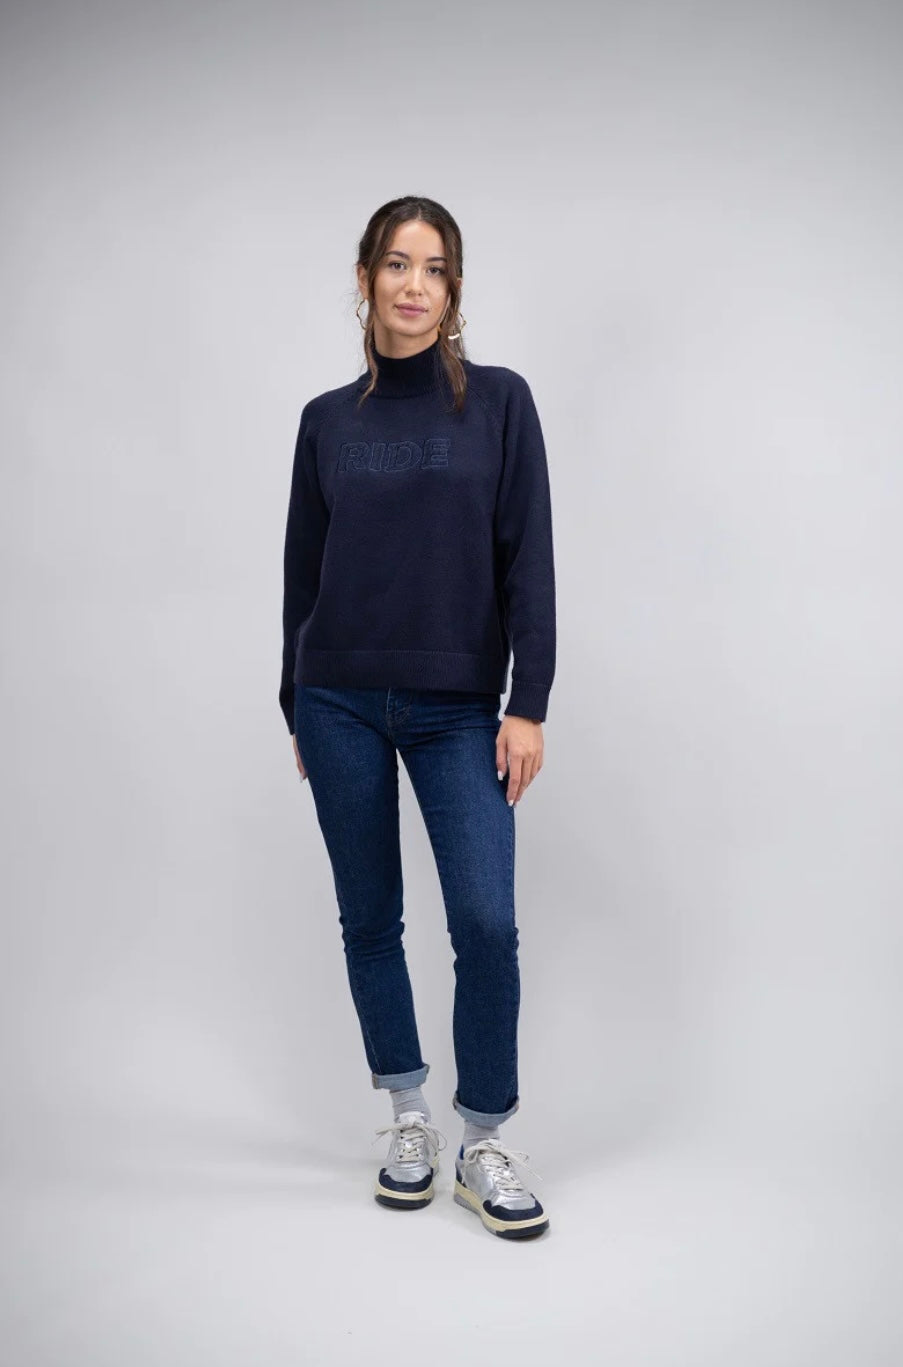 HARCOUR SWAP PULLOVER SWEATER